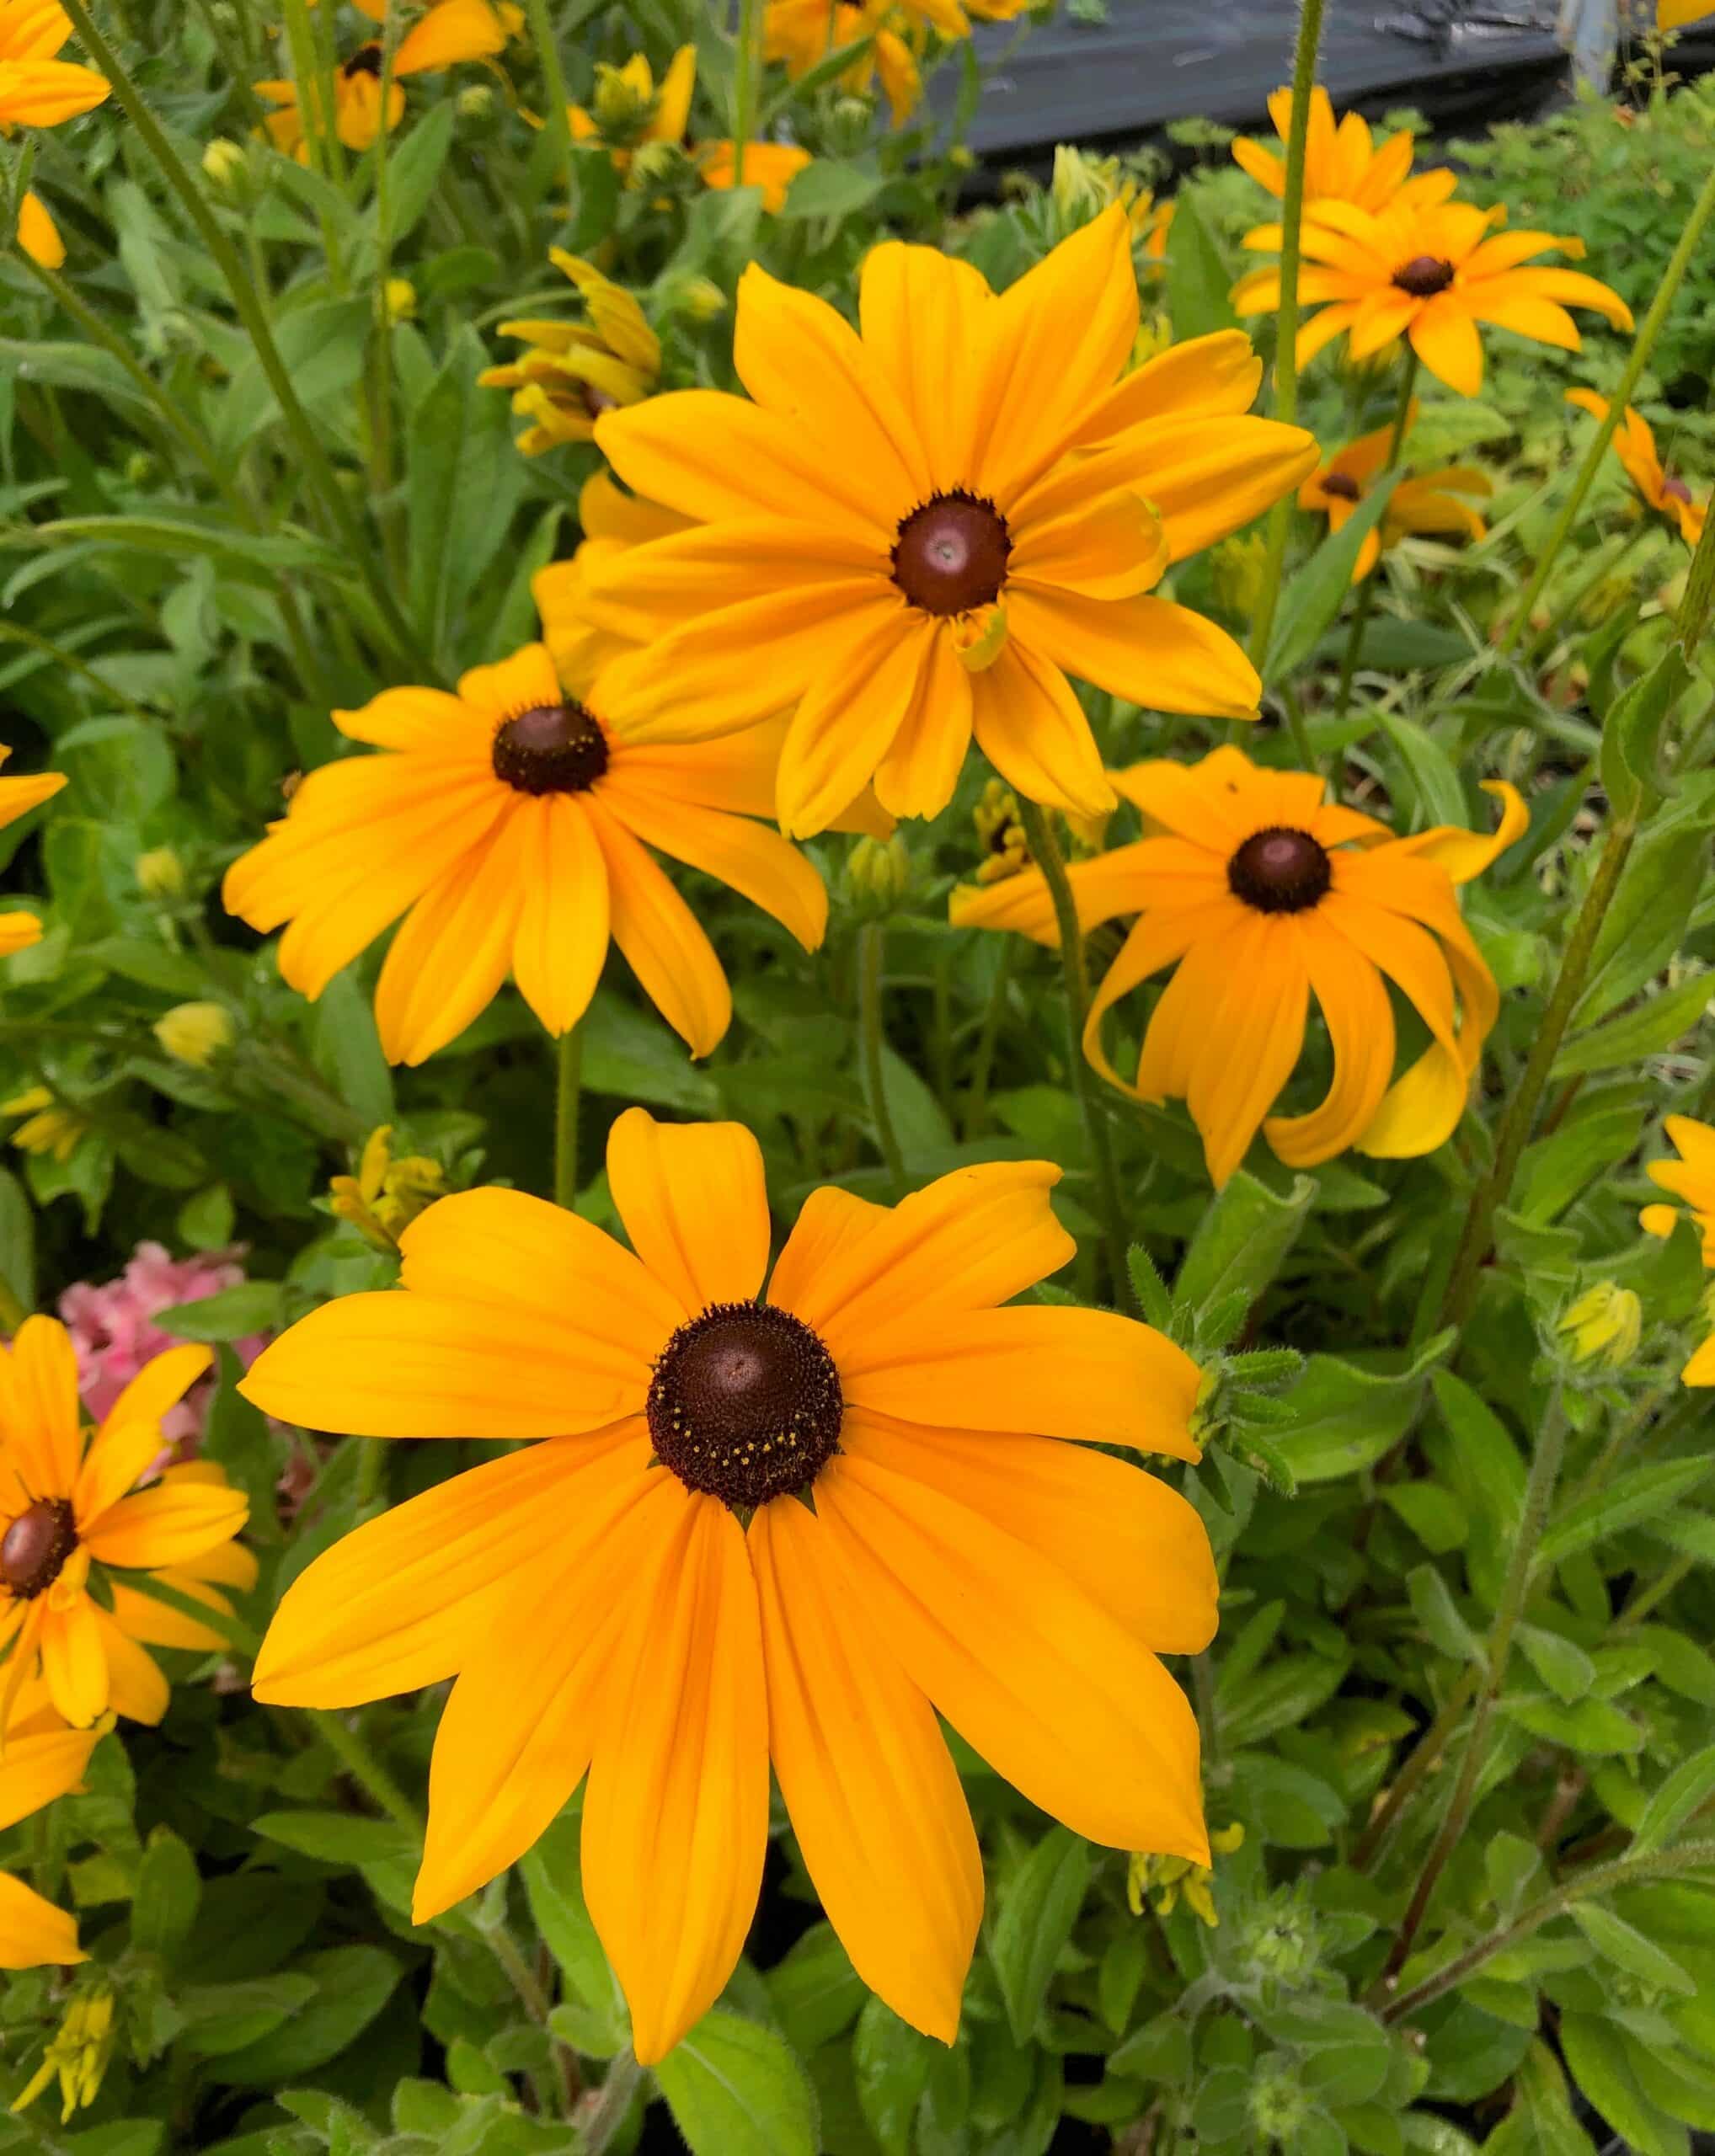 Rudbeckia hirta indian summer plants with flowers of yellow gold with a dark centre, and fresh green foliage.